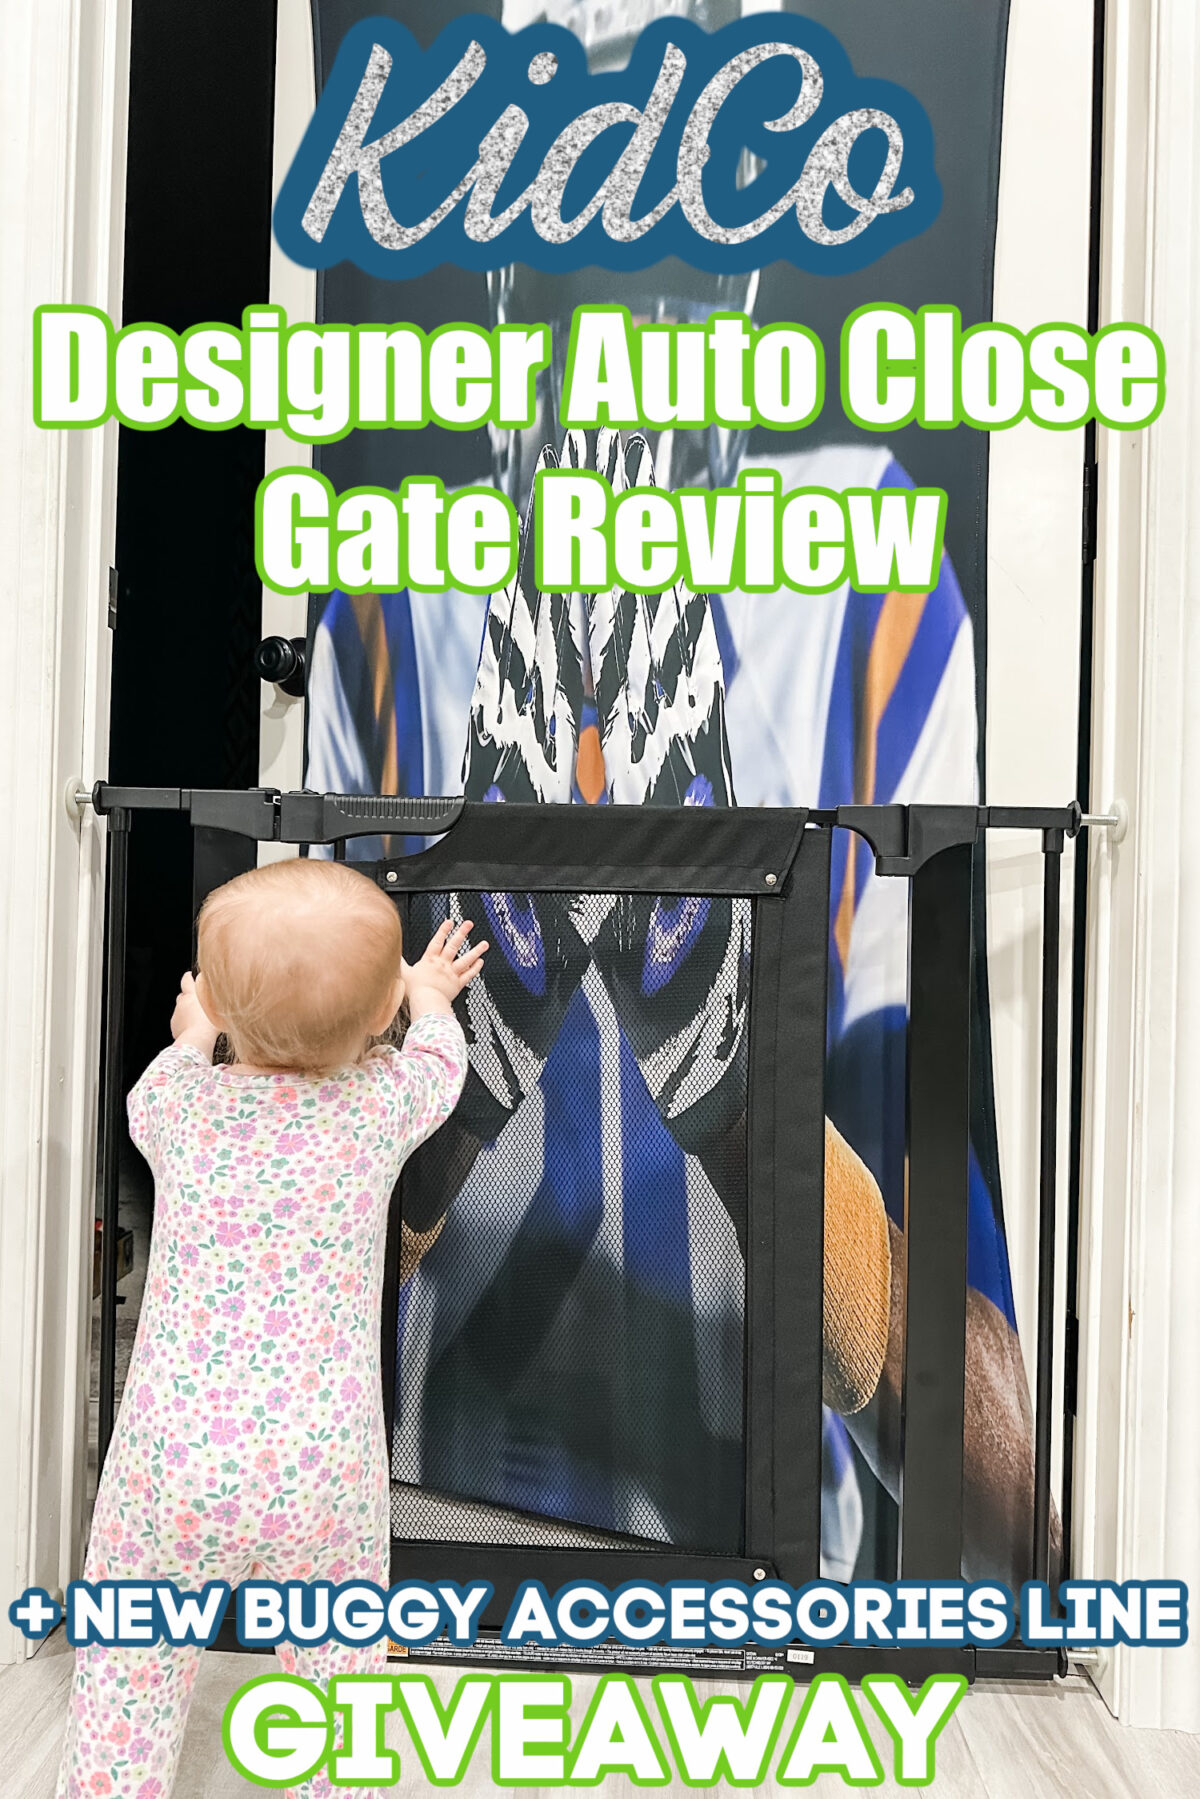 KidCo Designer Auto Close Gate Review + Stroller Accessories Giveaway